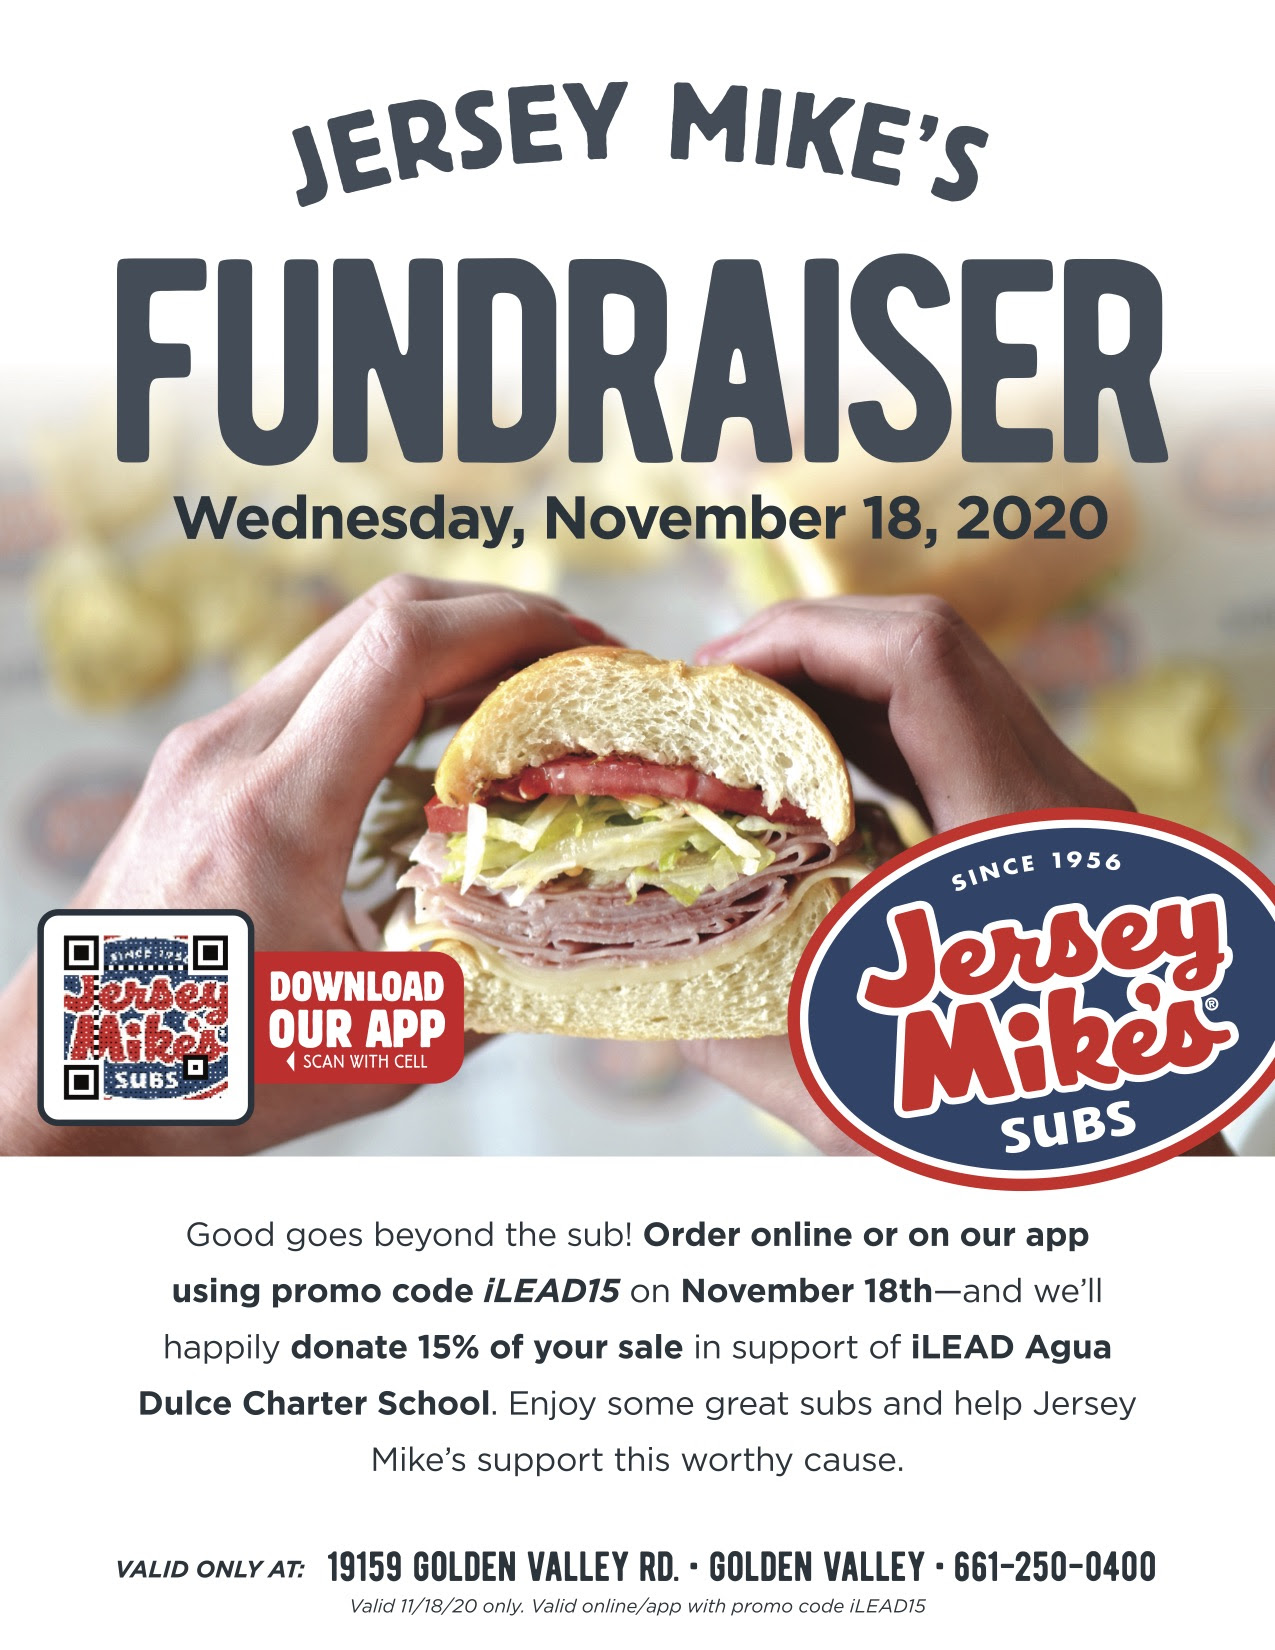 Jersey Mike's Dine-Out Fundraiser: Wednesday, November 18 - iLEAD Agua